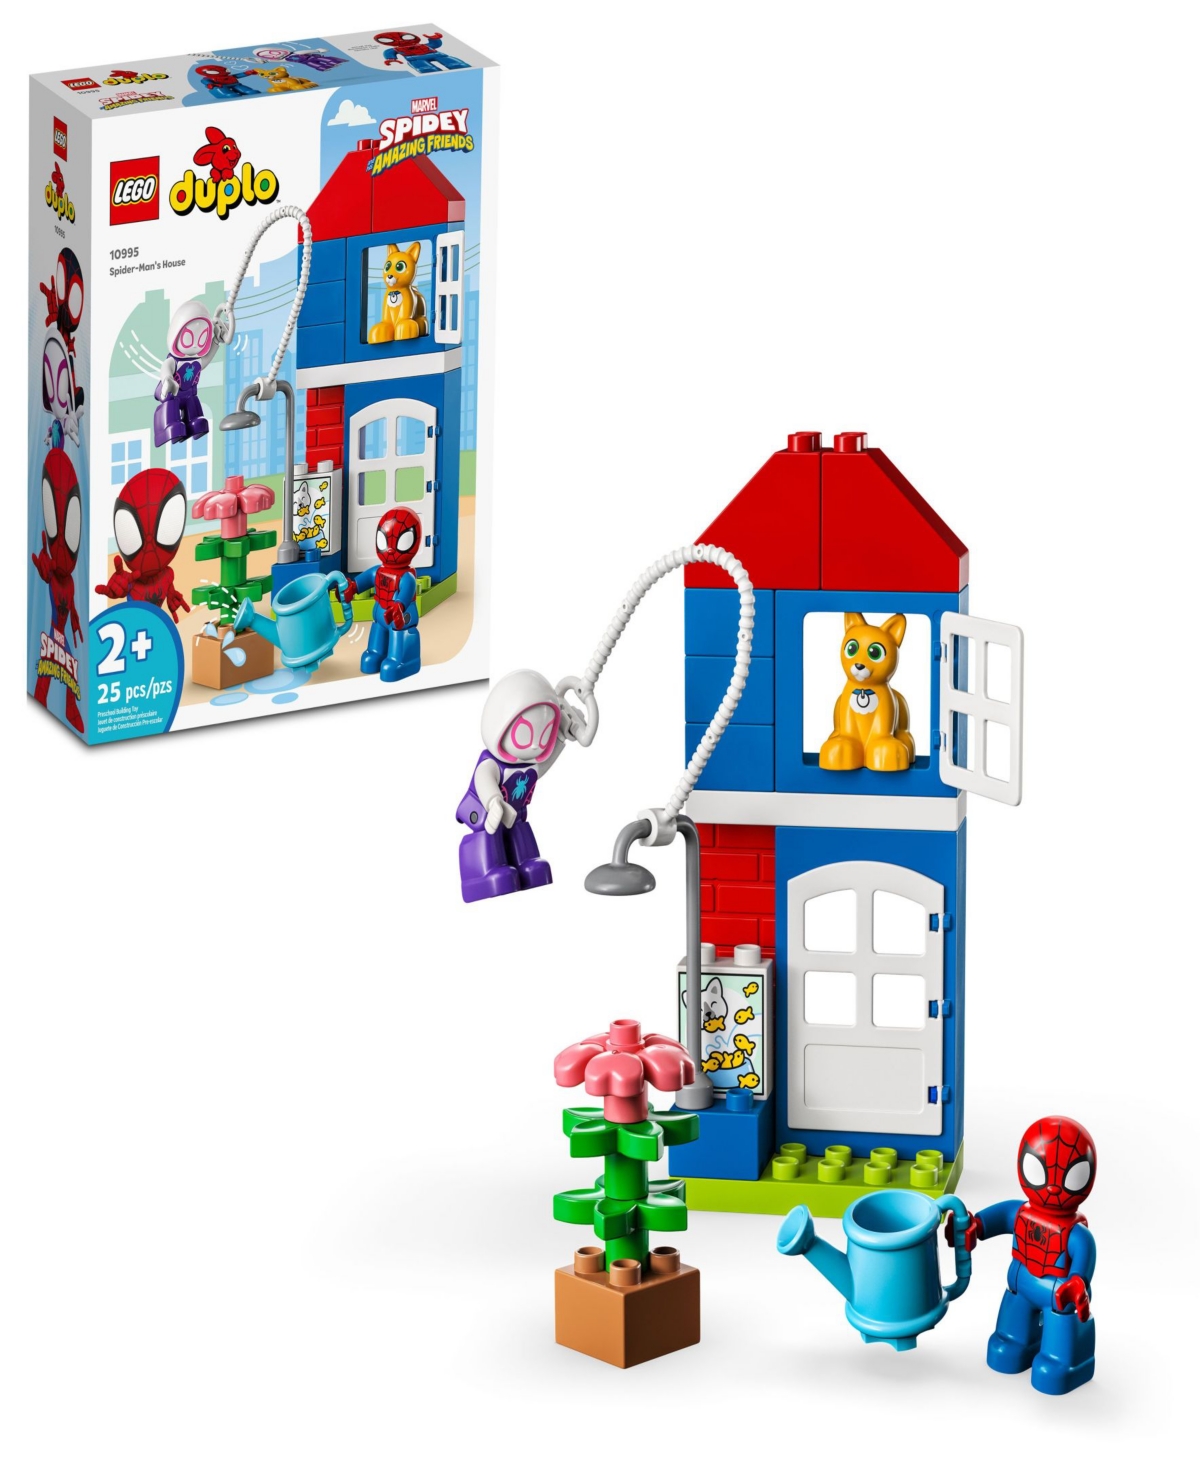 Lego Duplo 10995 Super Heroes Spider-man's House Toy Building Set With Spidey, Ghost-spider & Bootsie Fig In Multicolor